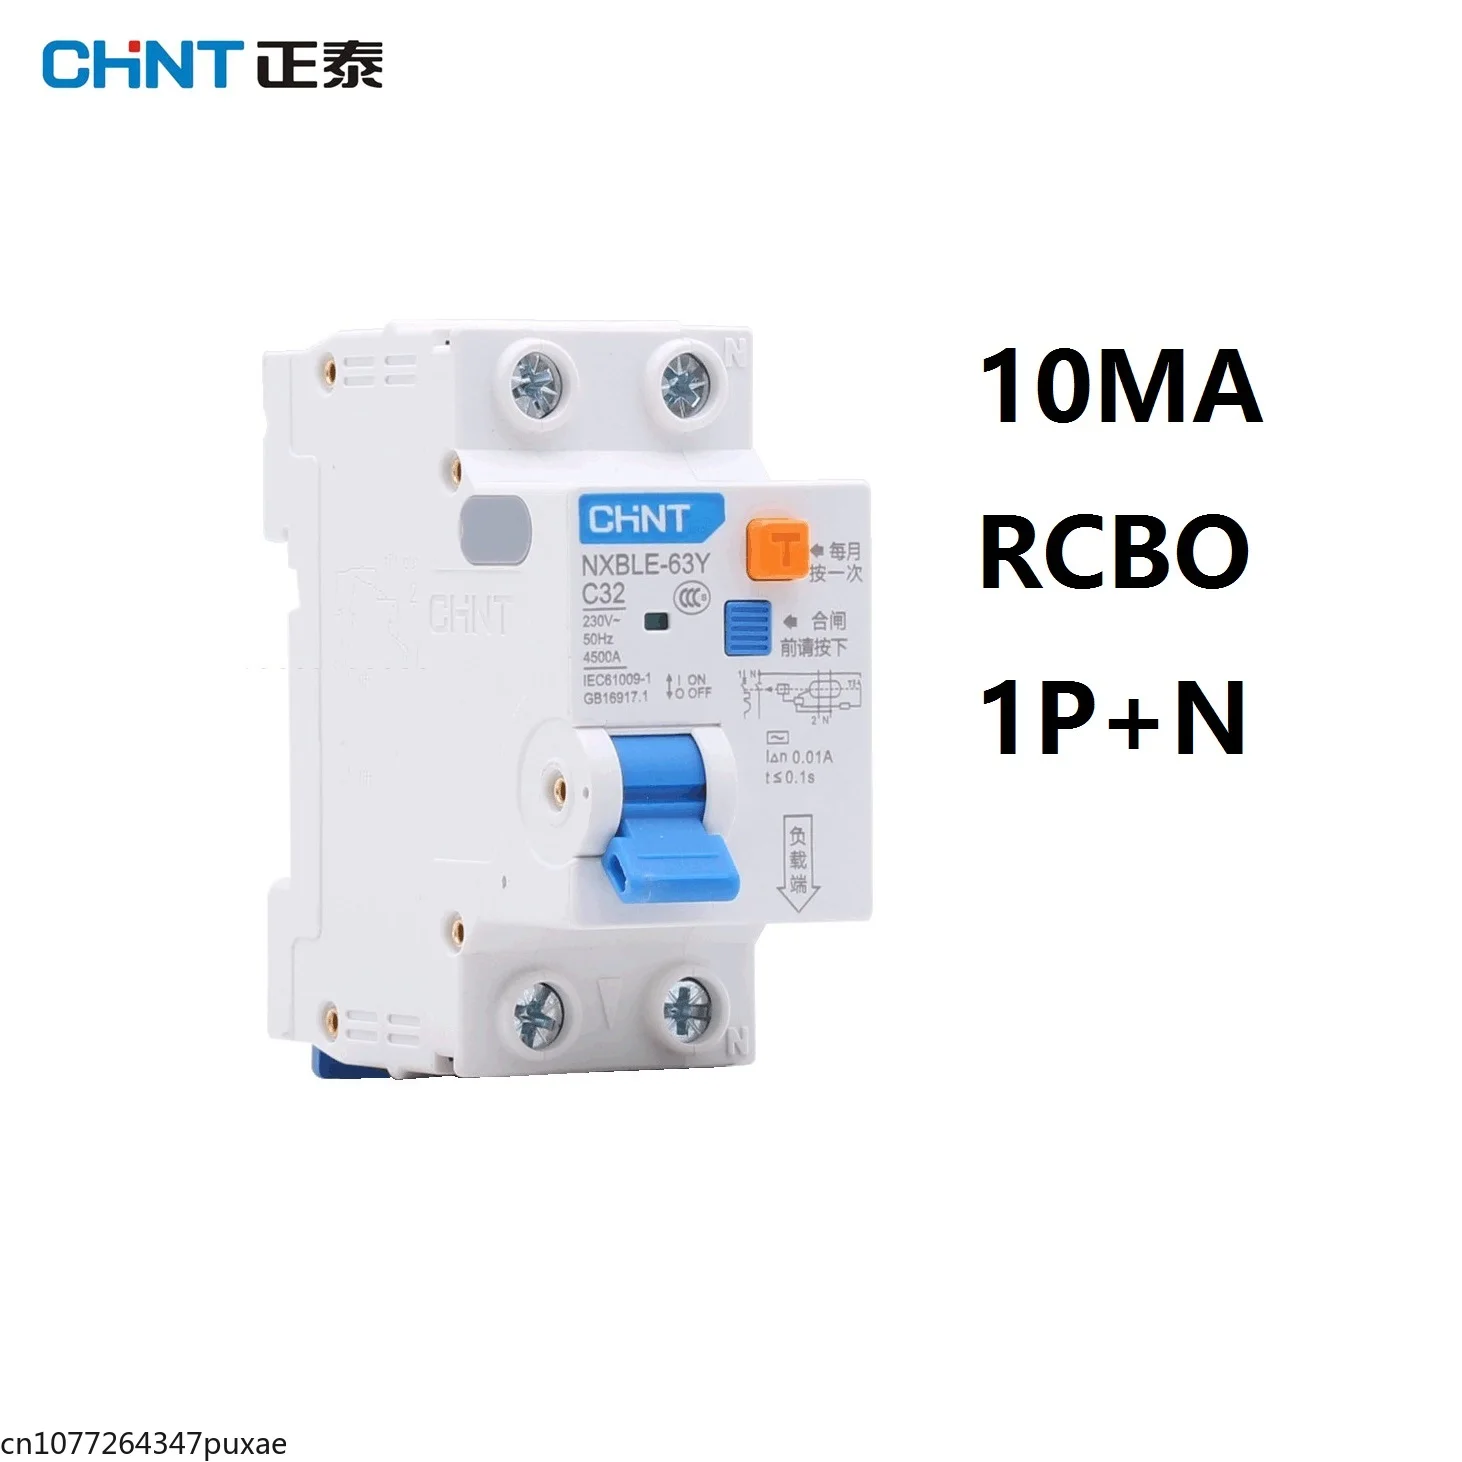 CHINT NXBLE-63Y 6A 10A 16A 32A 63A 10MA 0.01A RCBO 1P+N 230V Residual current Circuit breaker over current Leakage protection